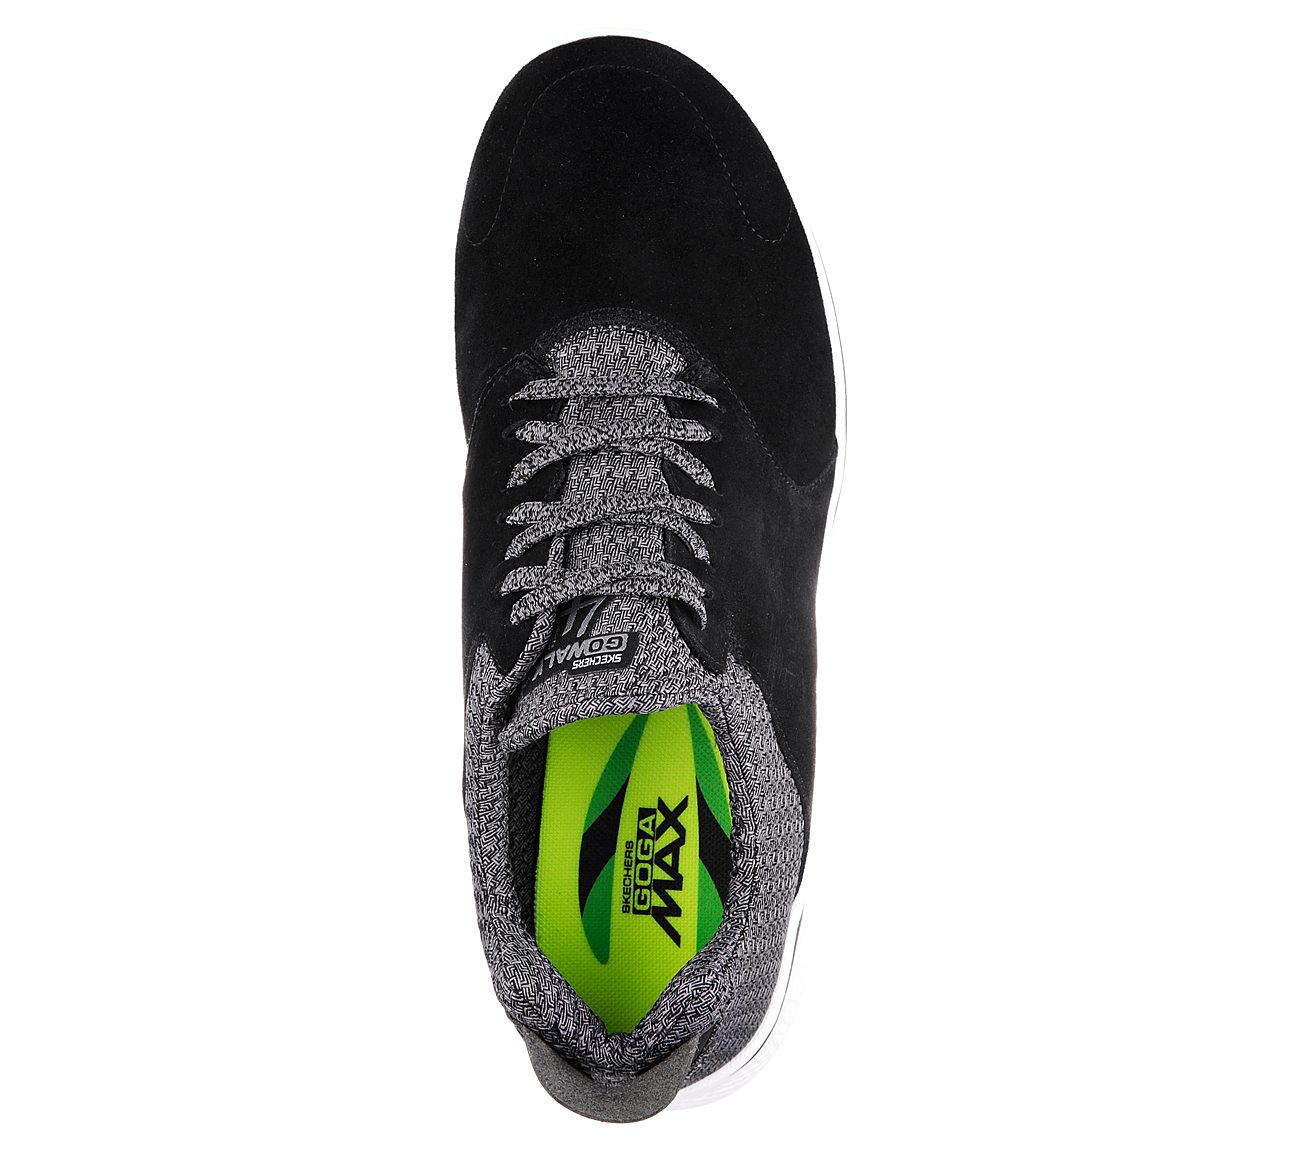 GO WALK 4 - ICONIC, BLACK/WHITE Footwear Top View